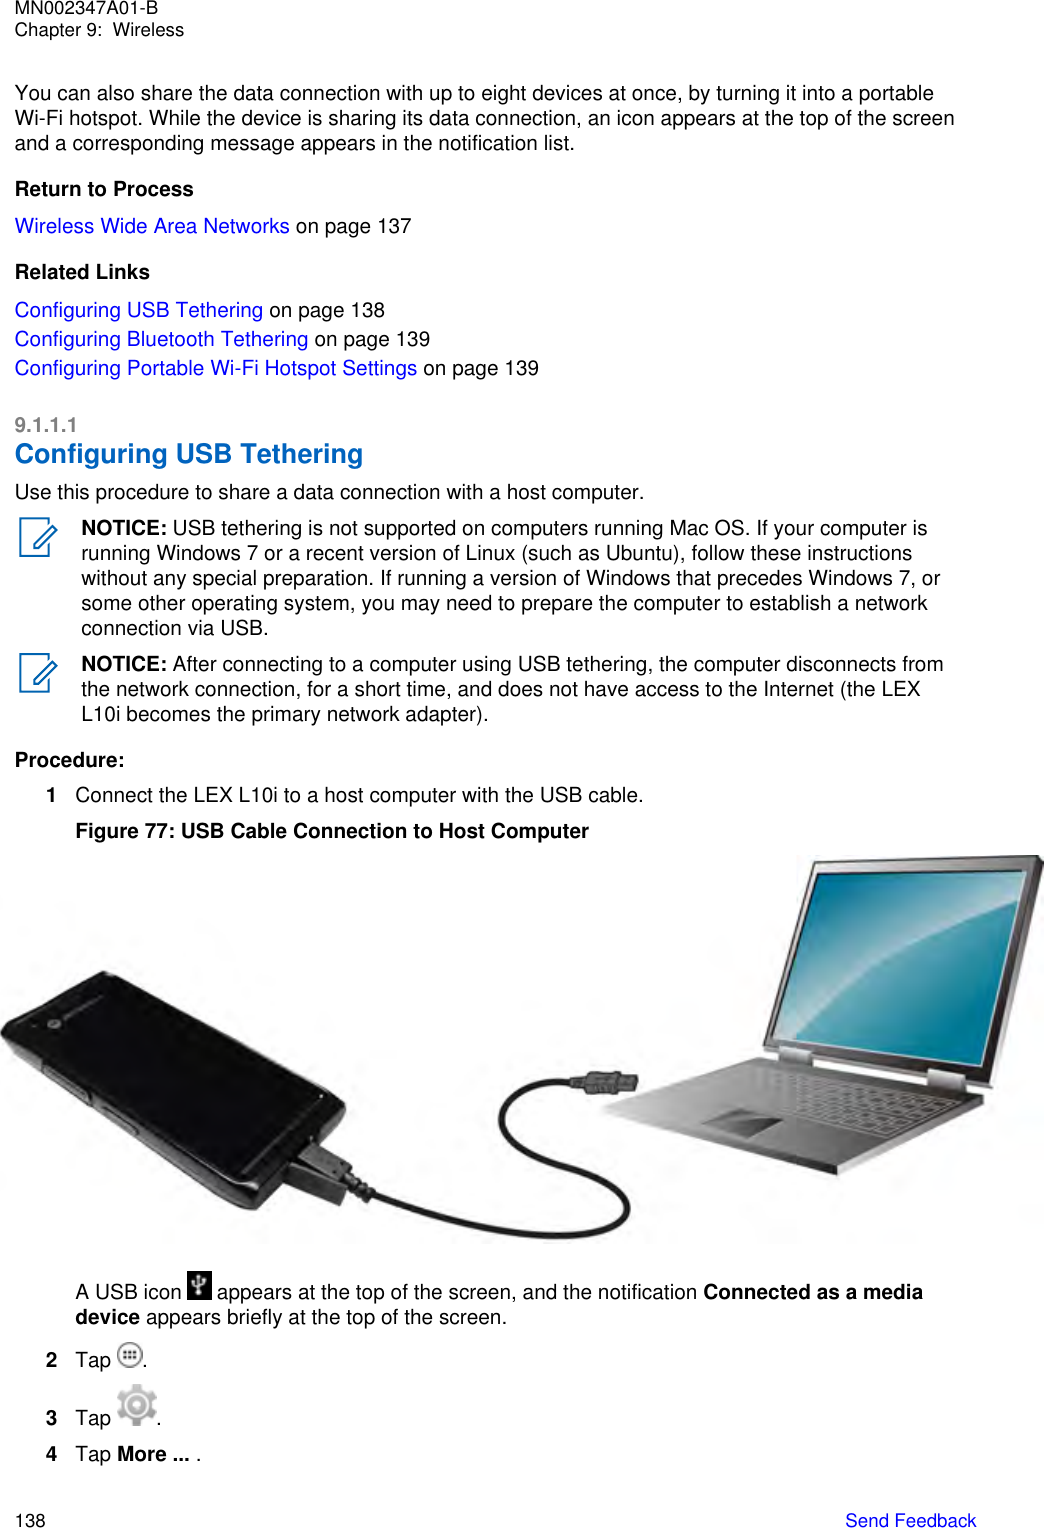 You can also share the data connection with up to eight devices at once, by turning it into a portableWi-Fi hotspot. While the device is sharing its data connection, an icon appears at the top of the screenand a corresponding message appears in the notification list.Return to ProcessWireless Wide Area Networks on page 137Related LinksConfiguring USB Tethering on page 138Configuring Bluetooth Tethering on page 139Configuring Portable Wi-Fi Hotspot Settings on page 1399.1.1.1Configuring USB TetheringUse this procedure to share a data connection with a host computer.NOTICE: USB tethering is not supported on computers running Mac OS. If your computer isrunning Windows 7 or a recent version of Linux (such as Ubuntu), follow these instructionswithout any special preparation. If running a version of Windows that precedes Windows 7, orsome other operating system, you may need to prepare the computer to establish a networkconnection via USB.NOTICE: After connecting to a computer using USB tethering, the computer disconnects fromthe network connection, for a short time, and does not have access to the Internet (the LEXL10i becomes the primary network adapter).Procedure:1Connect the LEX L10i to a host computer with the USB cable.Figure 77: USB Cable Connection to Host ComputerA USB icon   appears at the top of the screen, and the notification Connected as a mediadevice appears briefly at the top of the screen.2Tap  .3Tap  .4Tap More ... .MN002347A01-BChapter 9:  Wireless138   Send Feedback